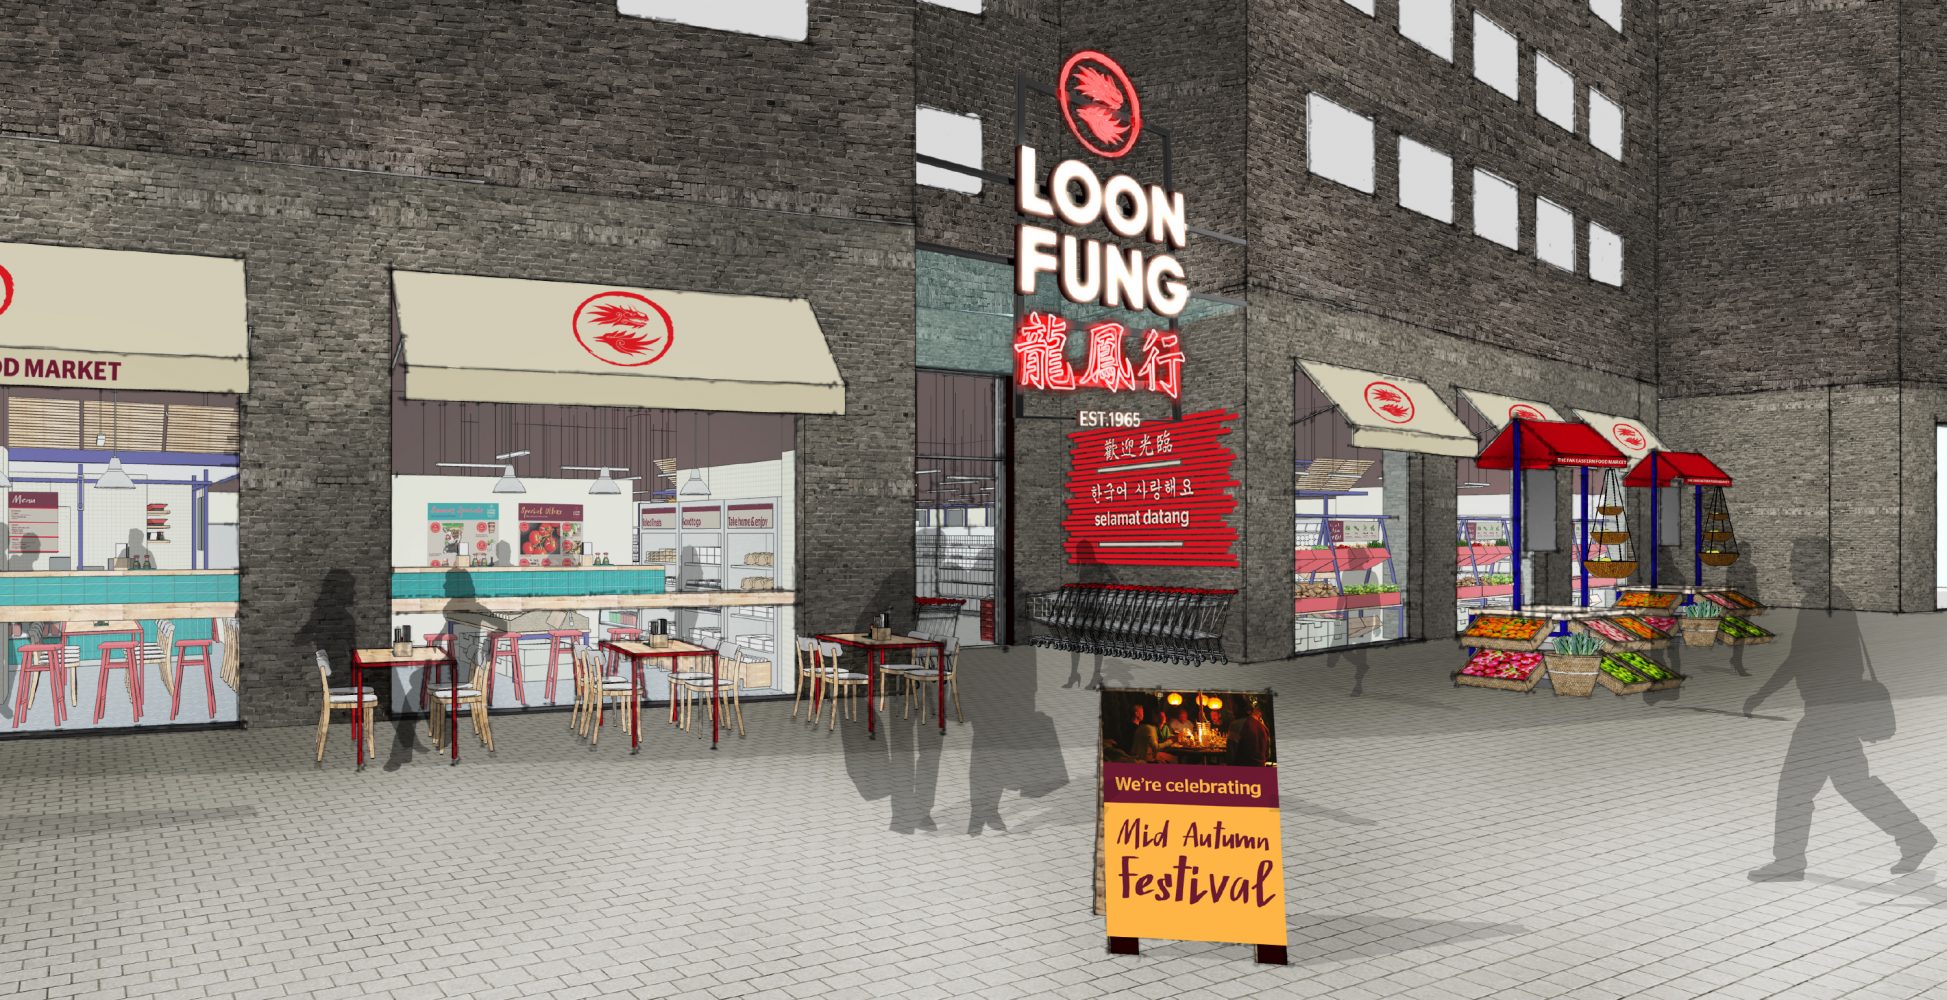 New retail design visual of the Household re-design of the Loon Fung brand.